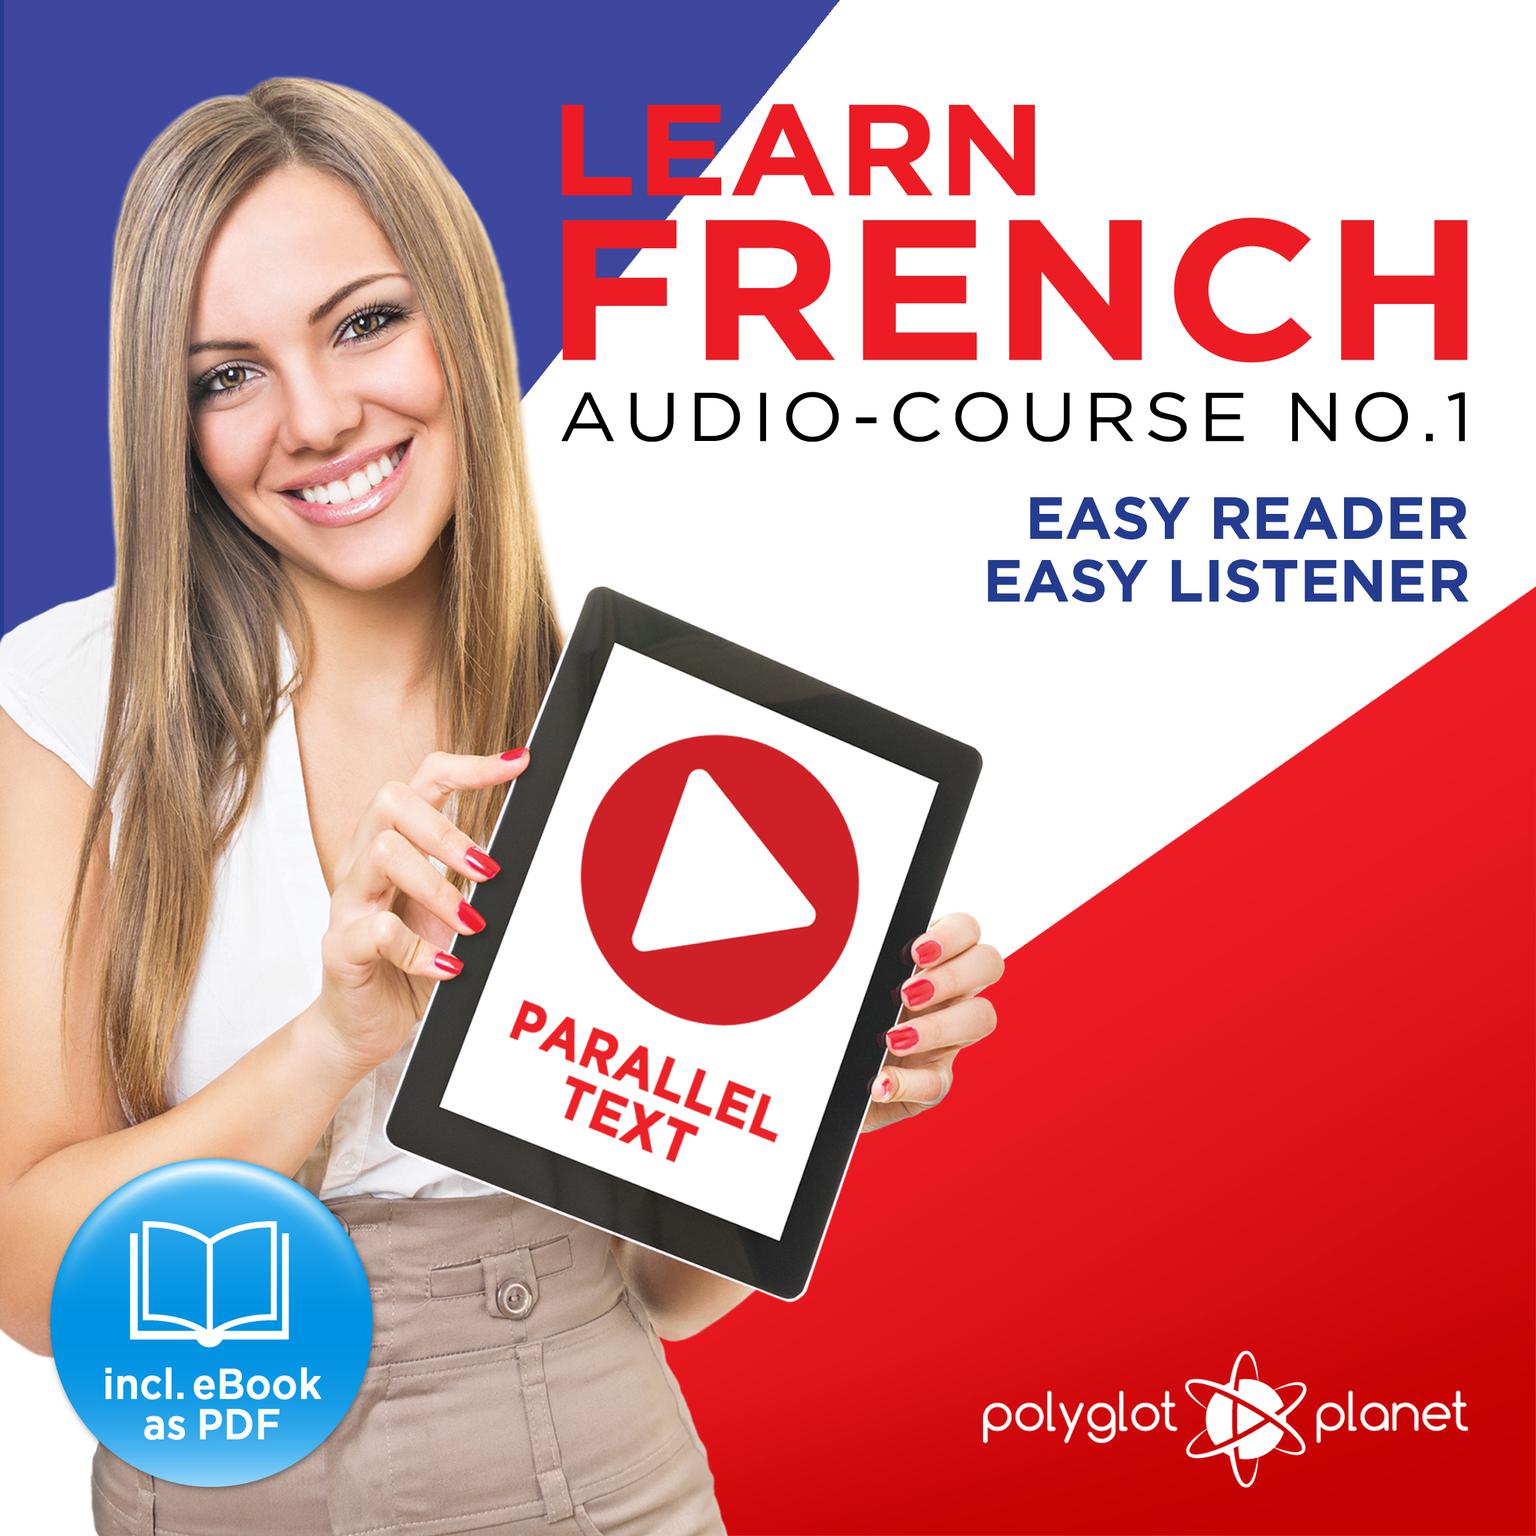 Learn French - Easy Reader - Easy Listener Parallel Text Audio Course No. 1 - The French Easy Reader - Easy Audio Learning Course Audiobook, by Polyglot Planet